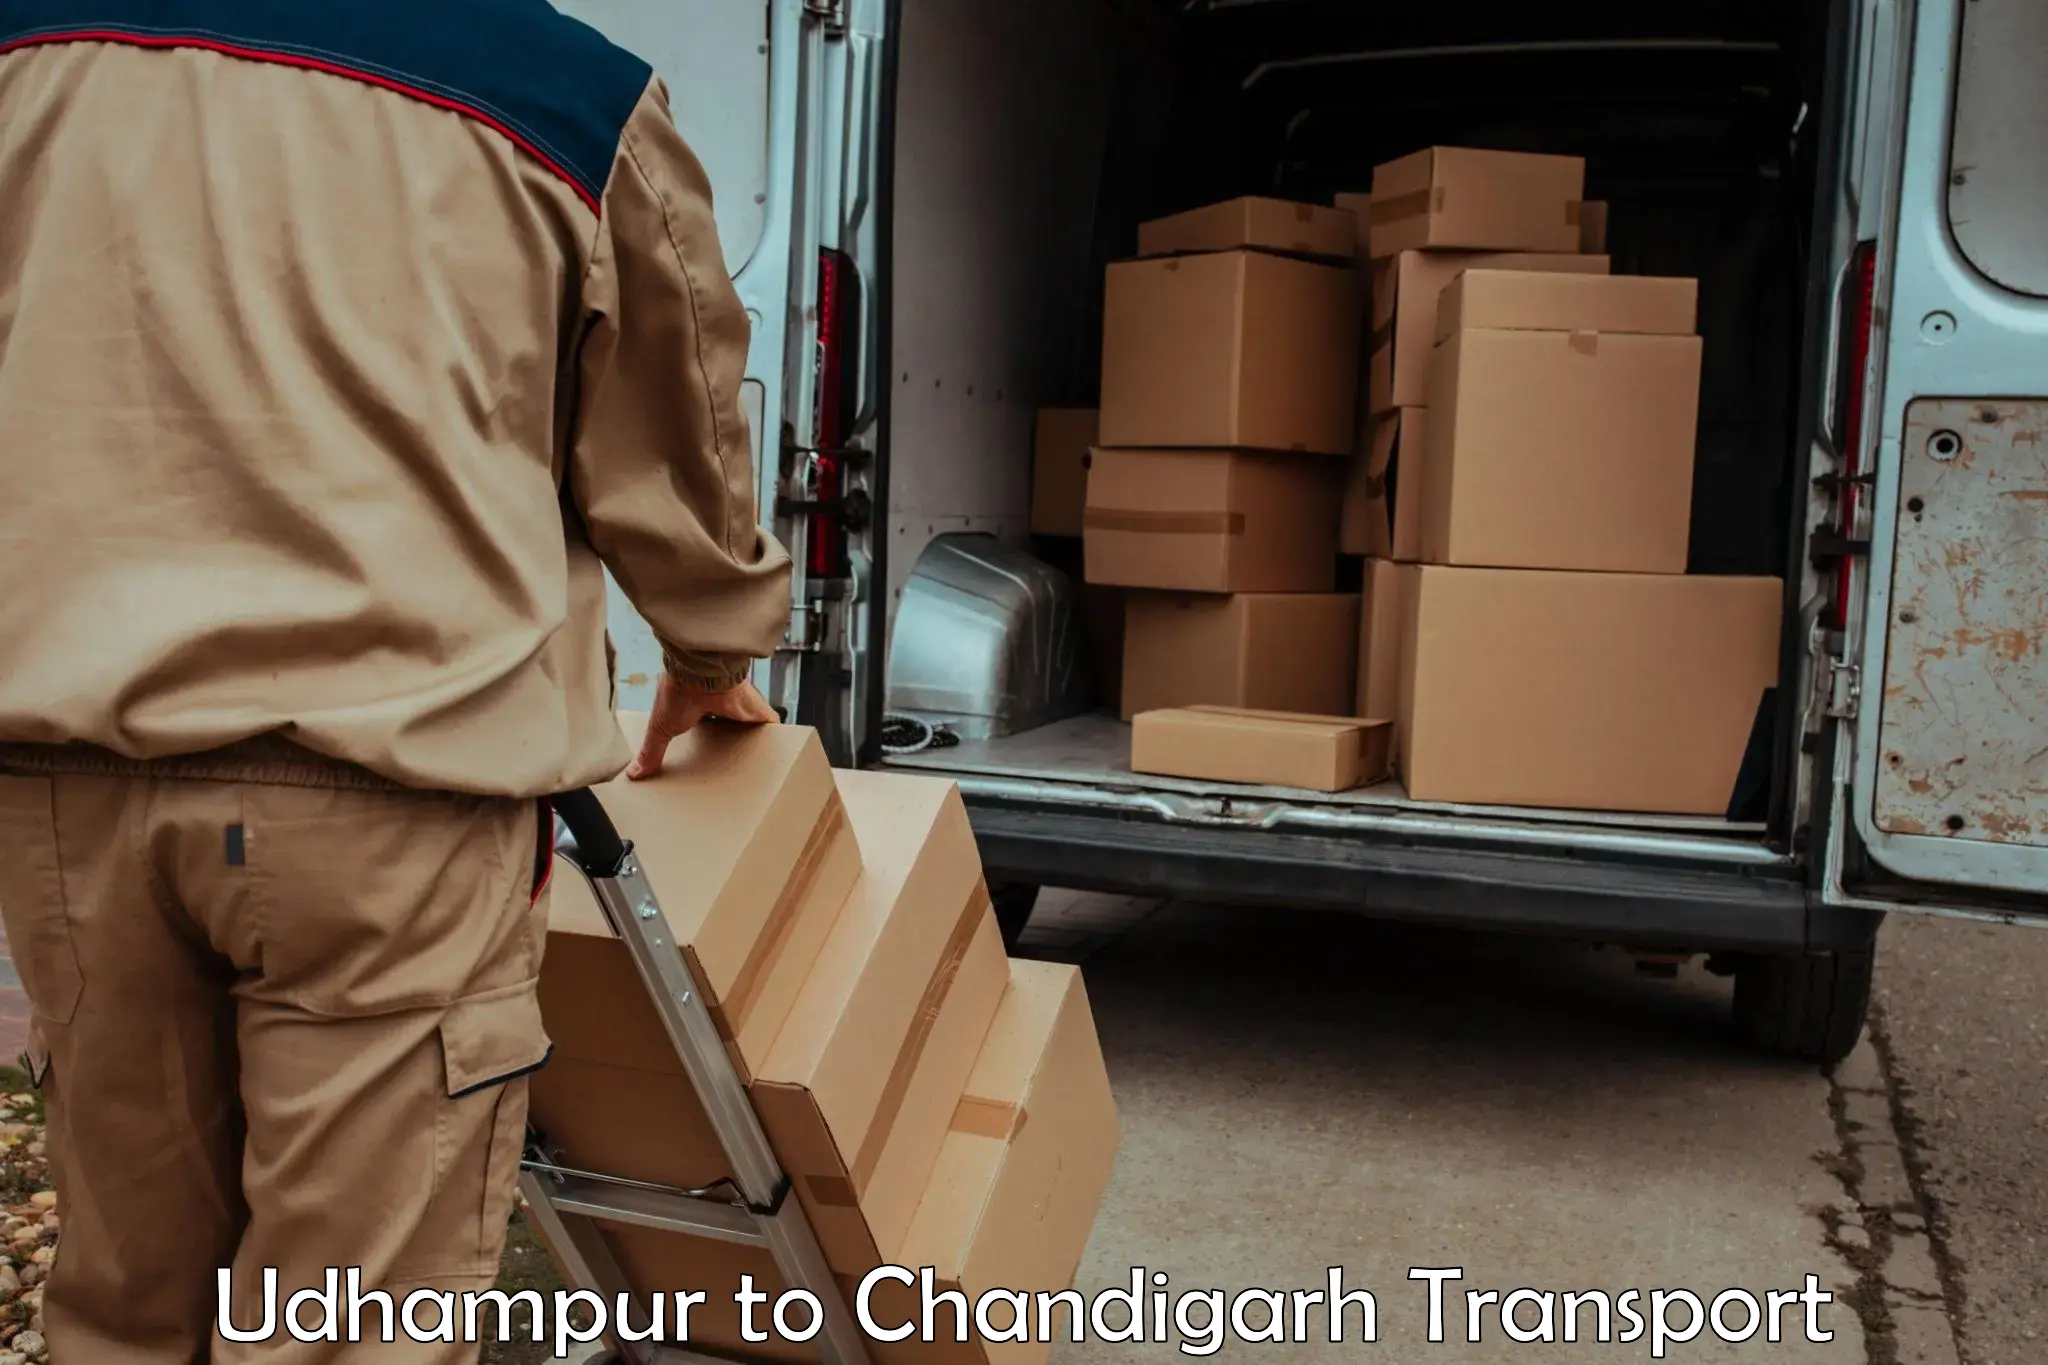 Transport bike from one state to another Udhampur to Chandigarh